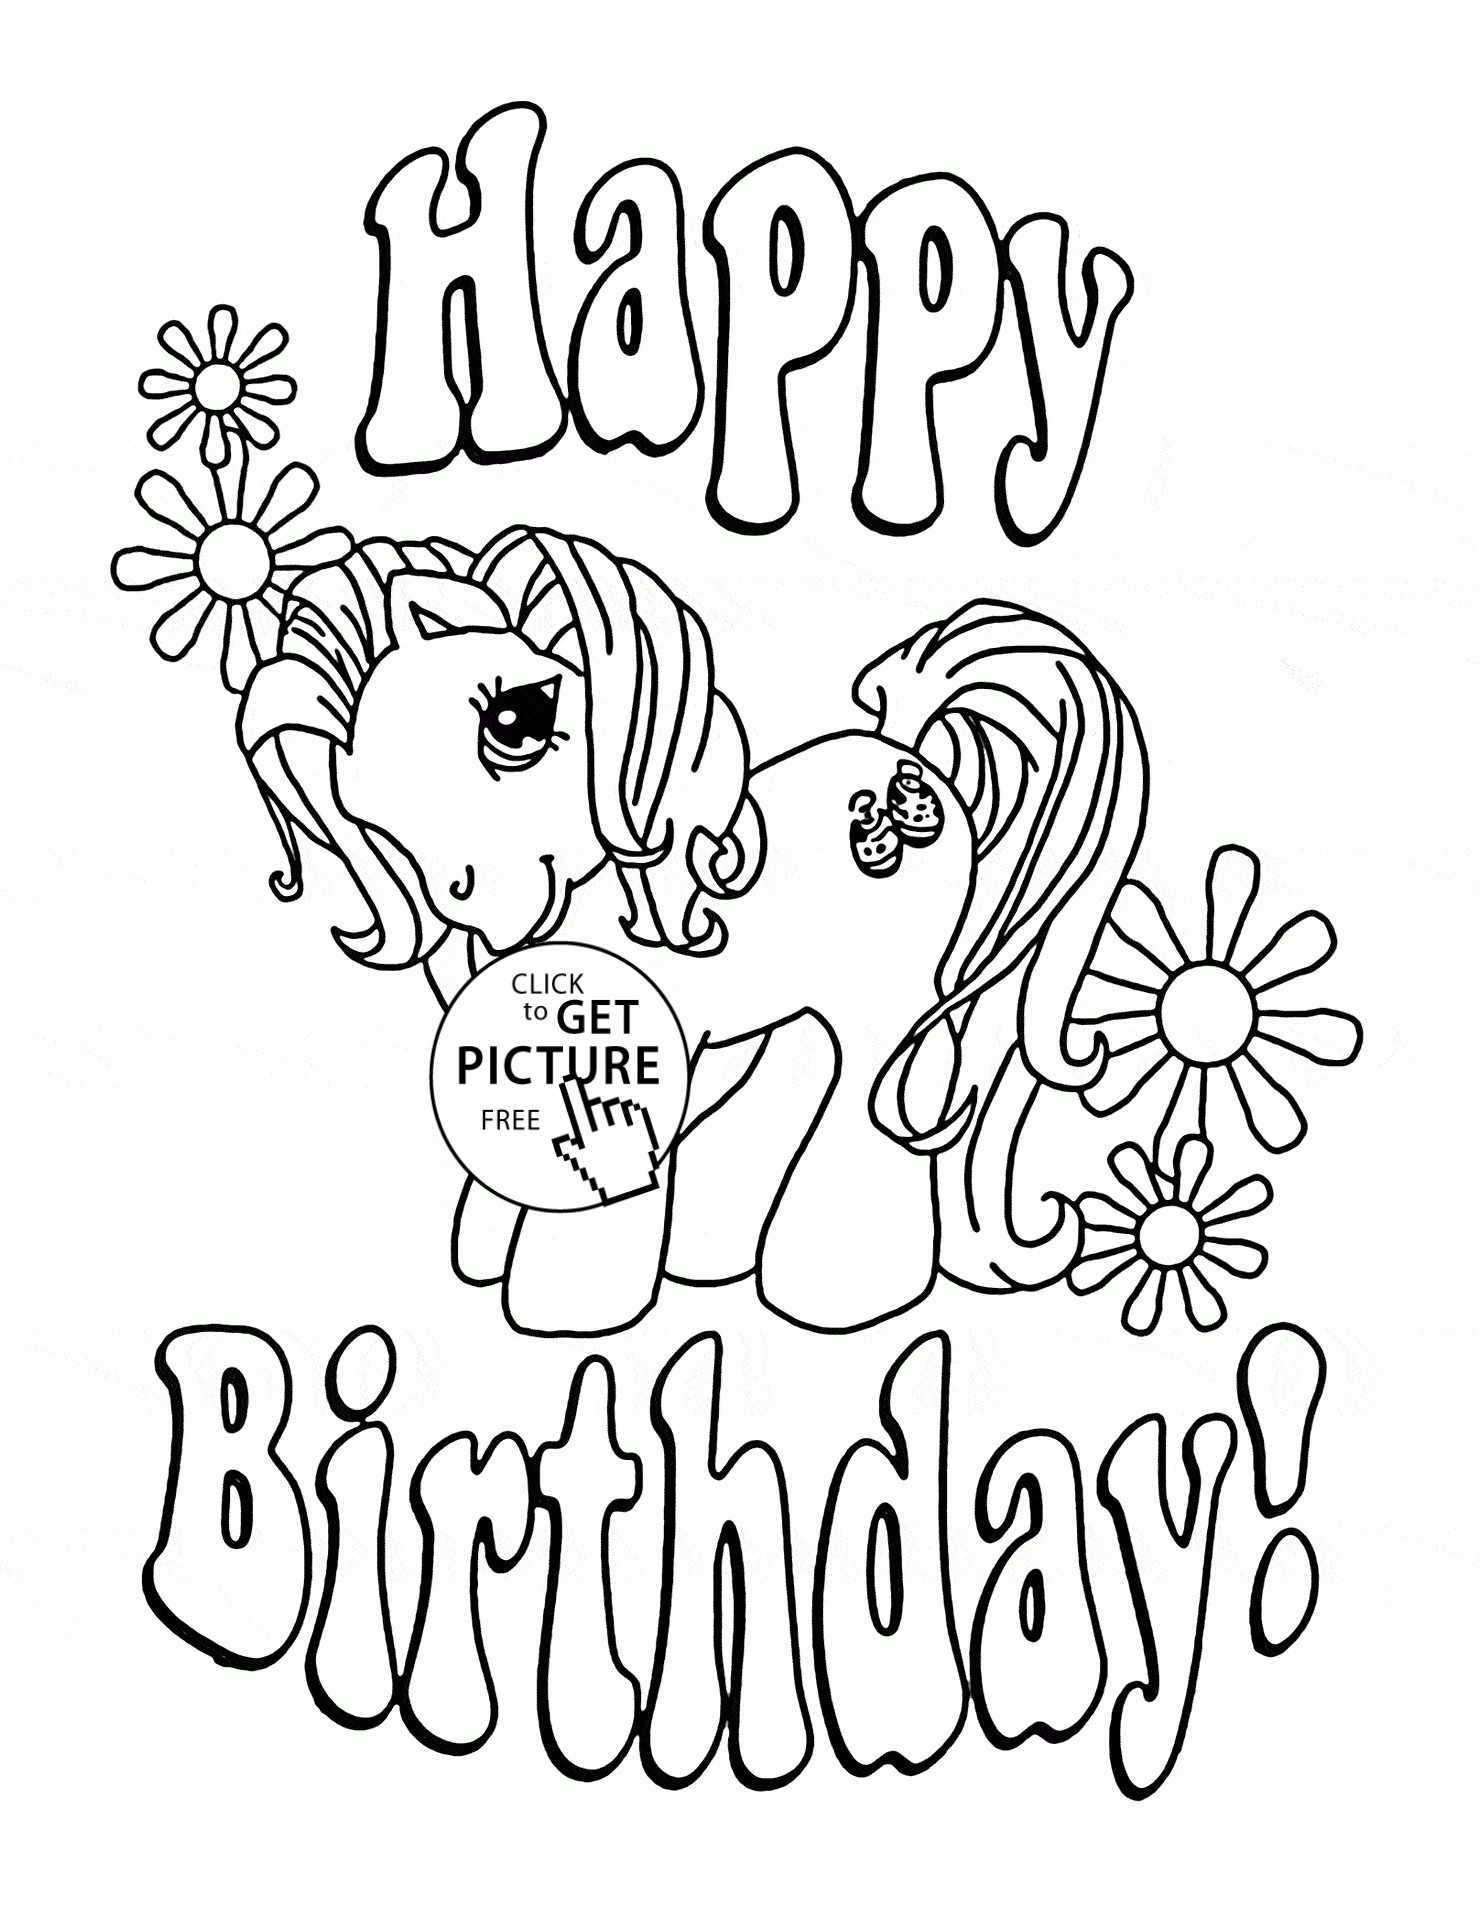 happy-birthday-grandpa-coloring-page-at-getdrawings-free-download